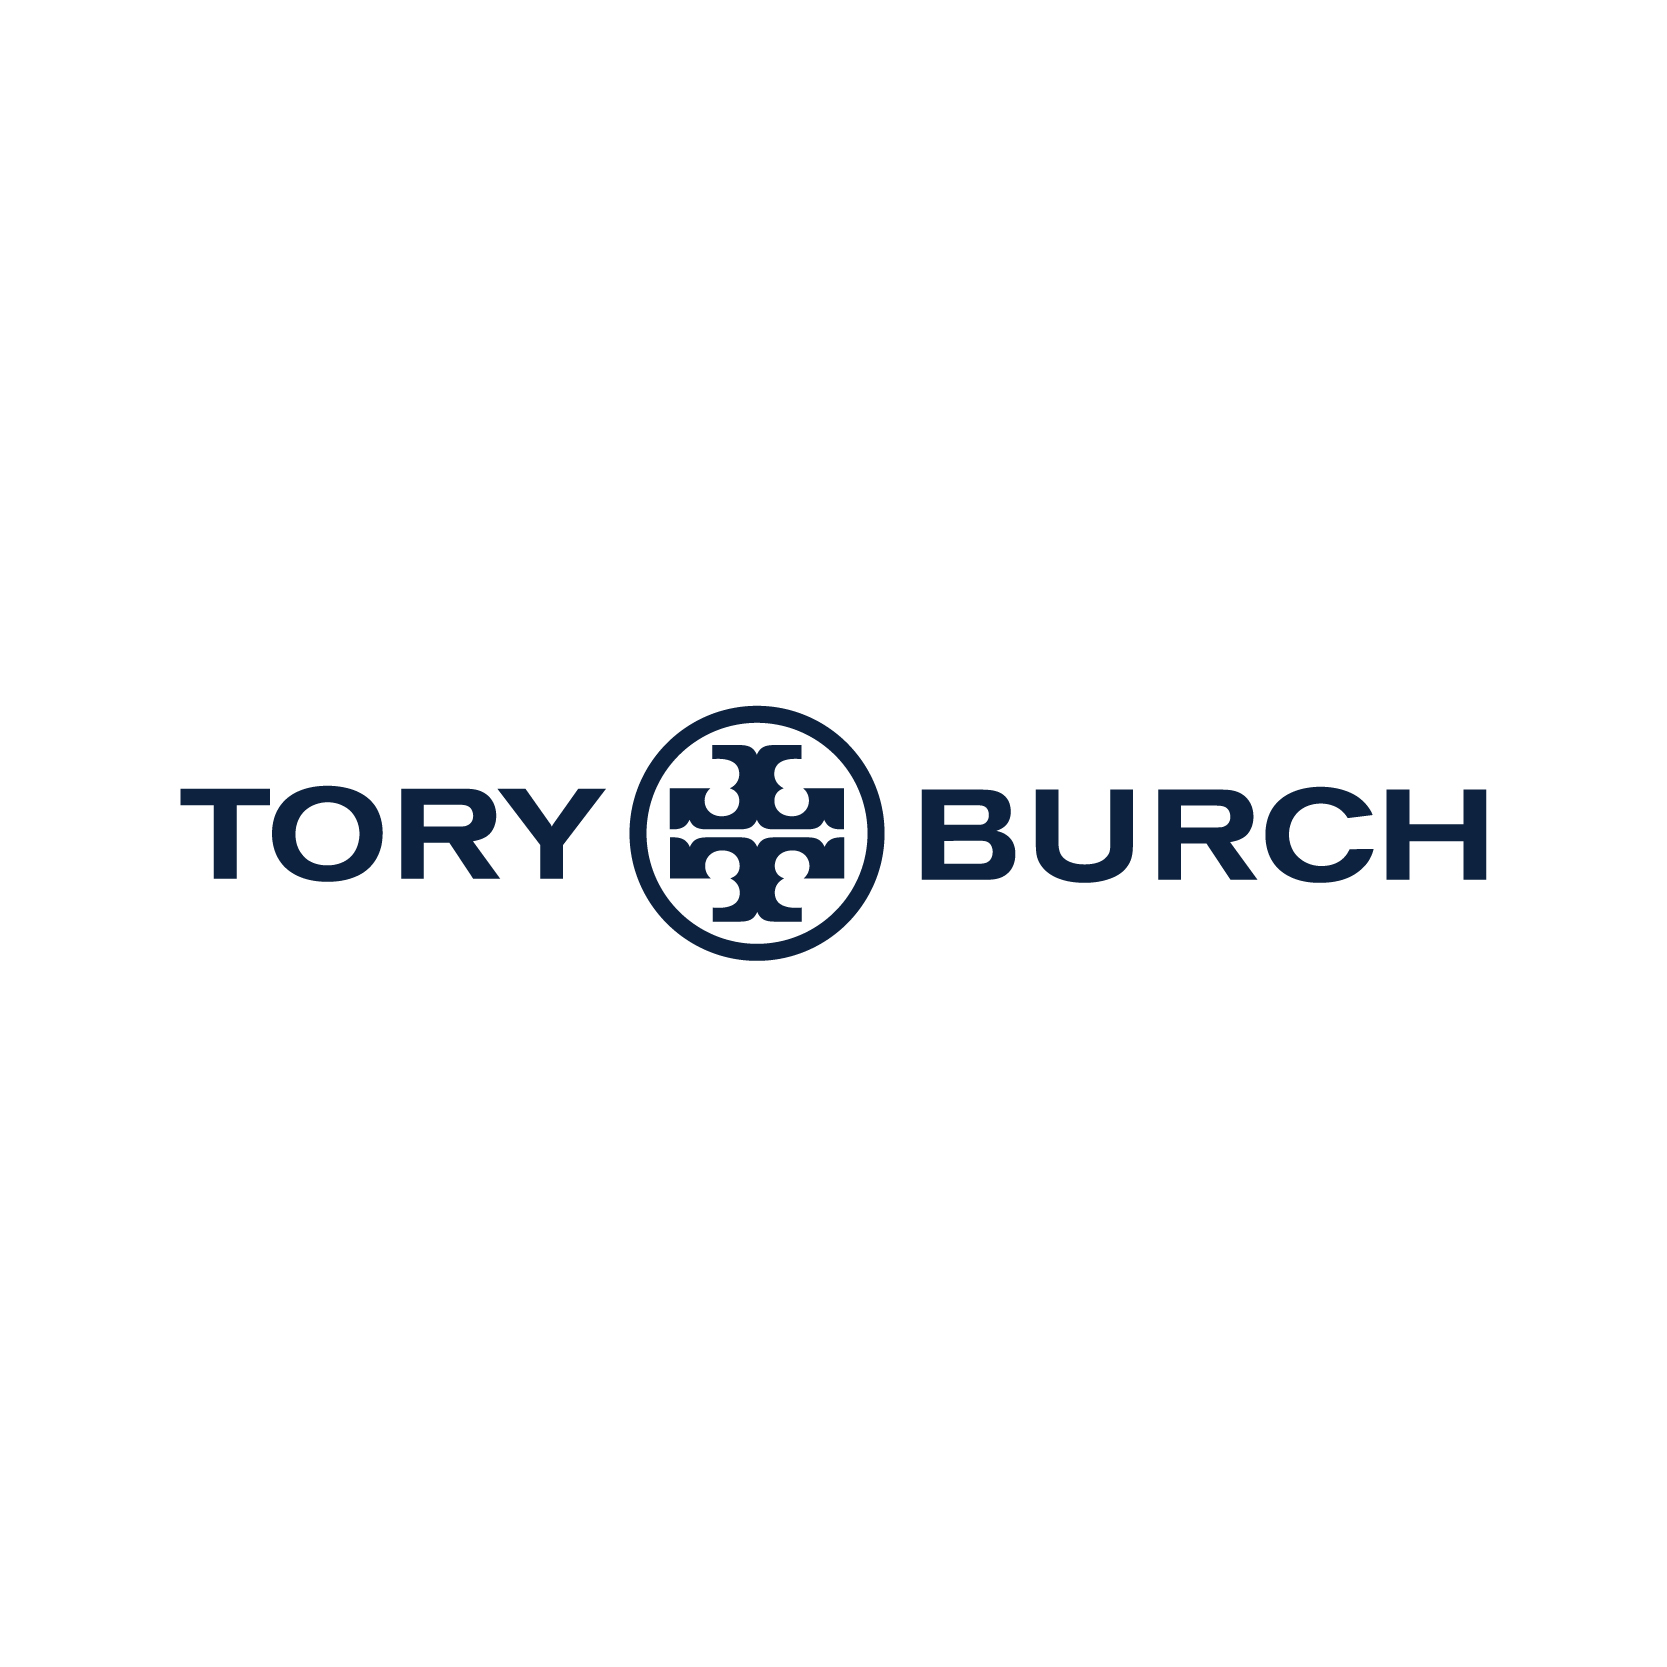  Tory Burch Discount codes